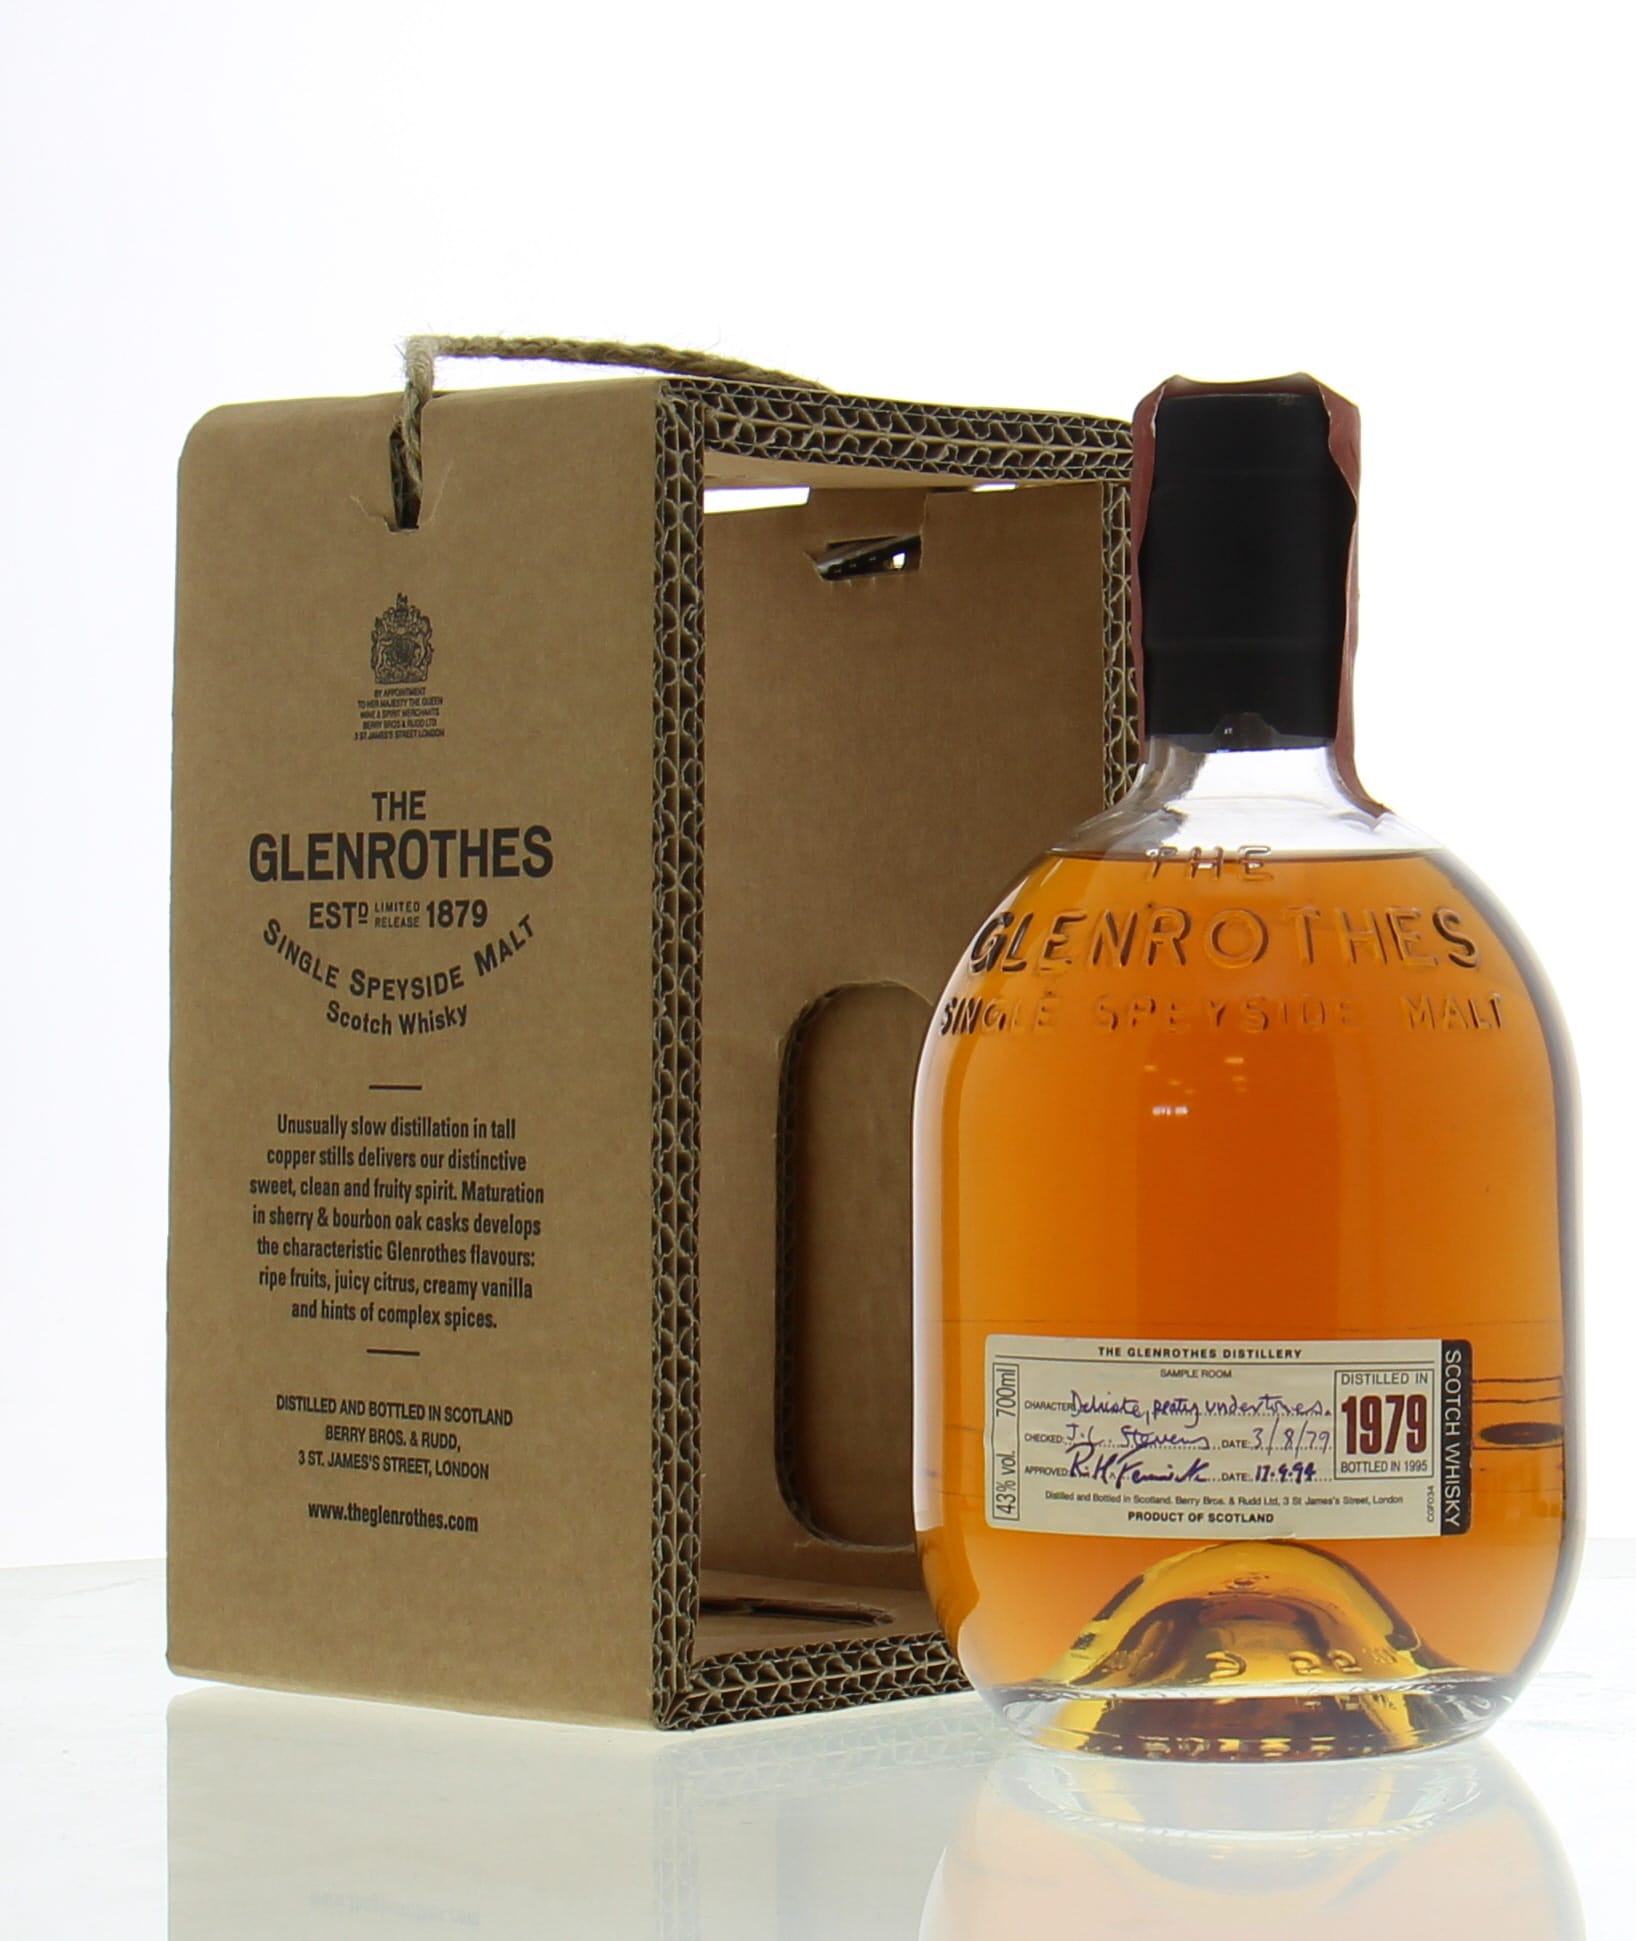 Glenrothes - 1979 Approved: 17.09.94 43% 1979 In Original Container